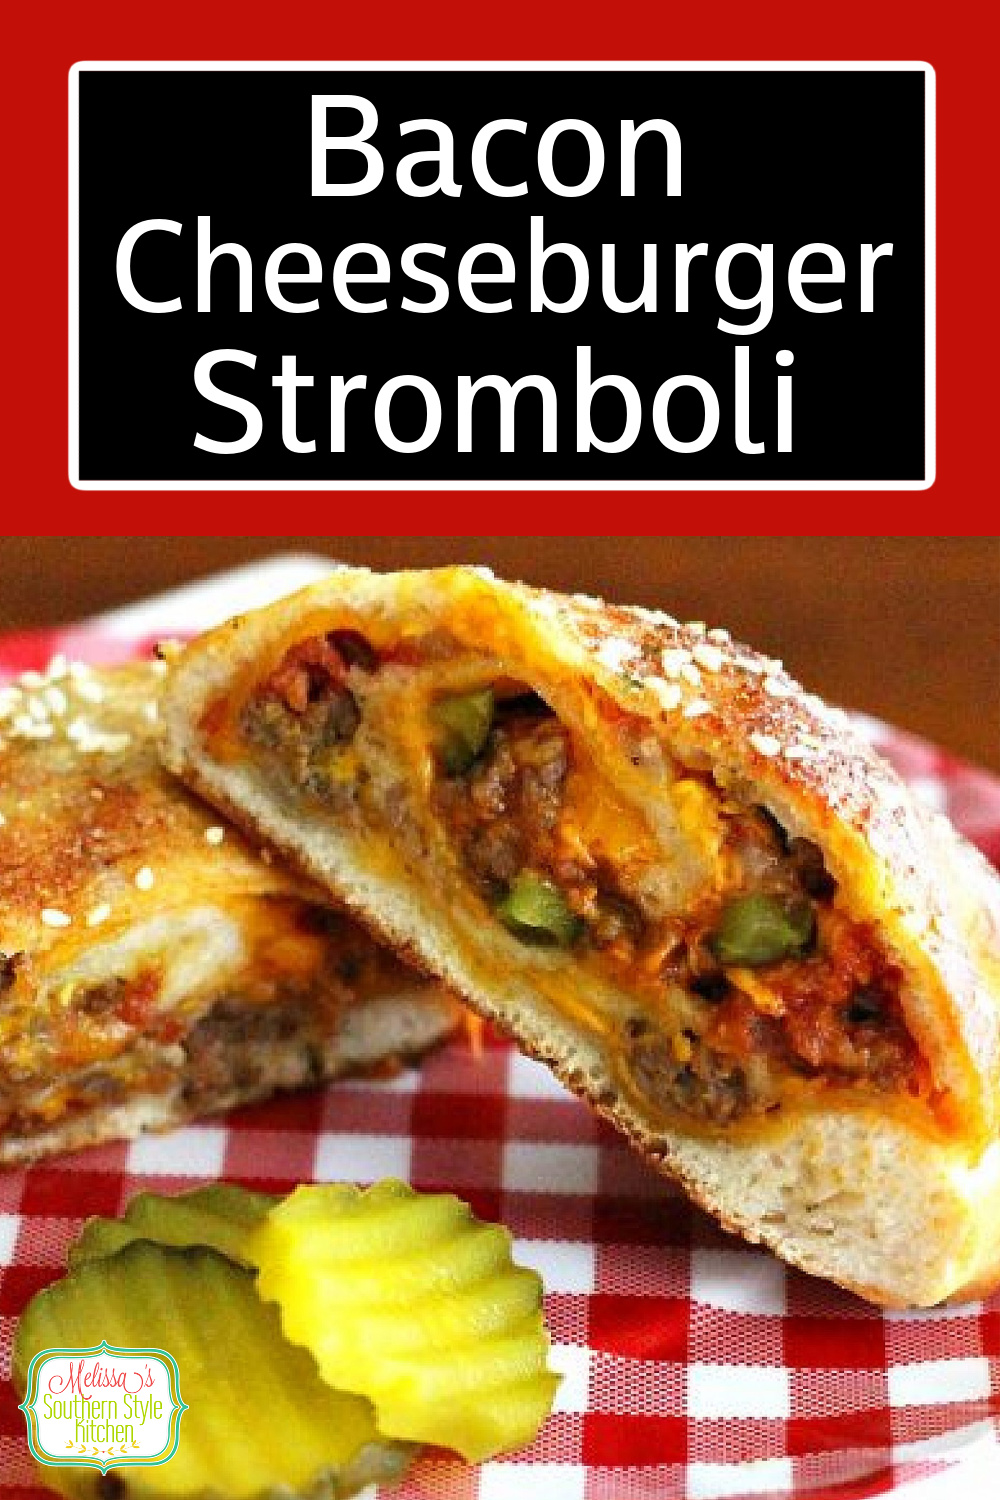 Skip the buns and make this Bacon Cheeseburger Stromboli with pizza dough and you'll wrap up dinner in no time flat #baconcheeseburgers #cheeseburgerrecipes #stromboli #baconcheeseburgerstromboli #pizzadough #strombolirecipes via @melissasssk